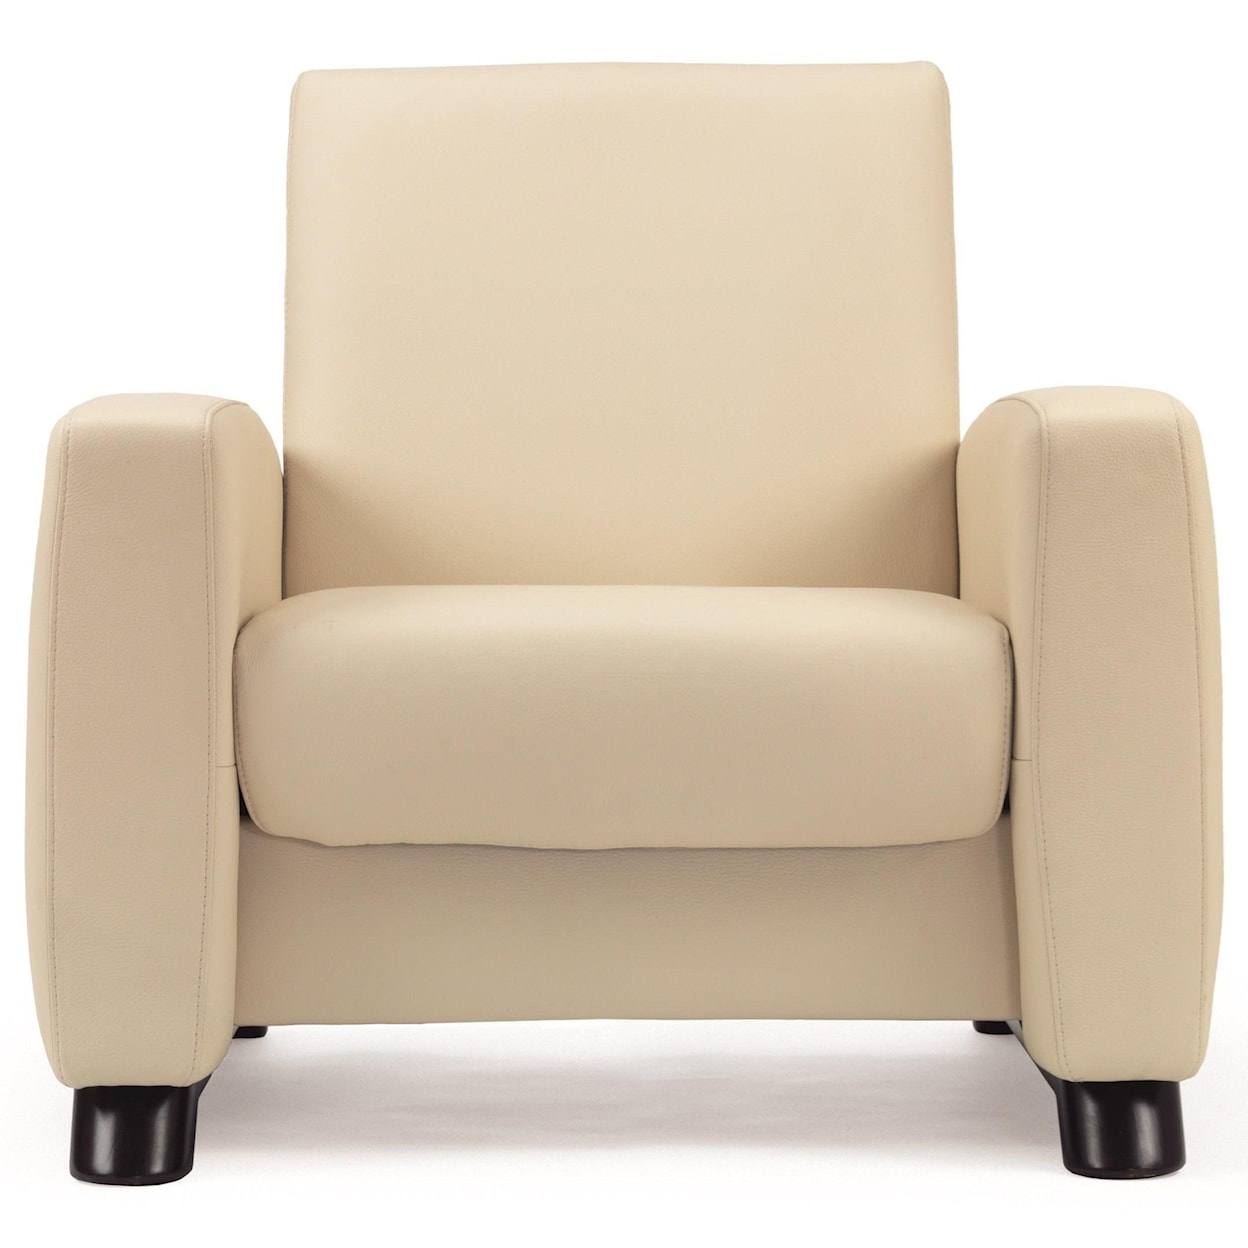 Stressless Arion 19 - A10 Low-Back Reclining Chair 